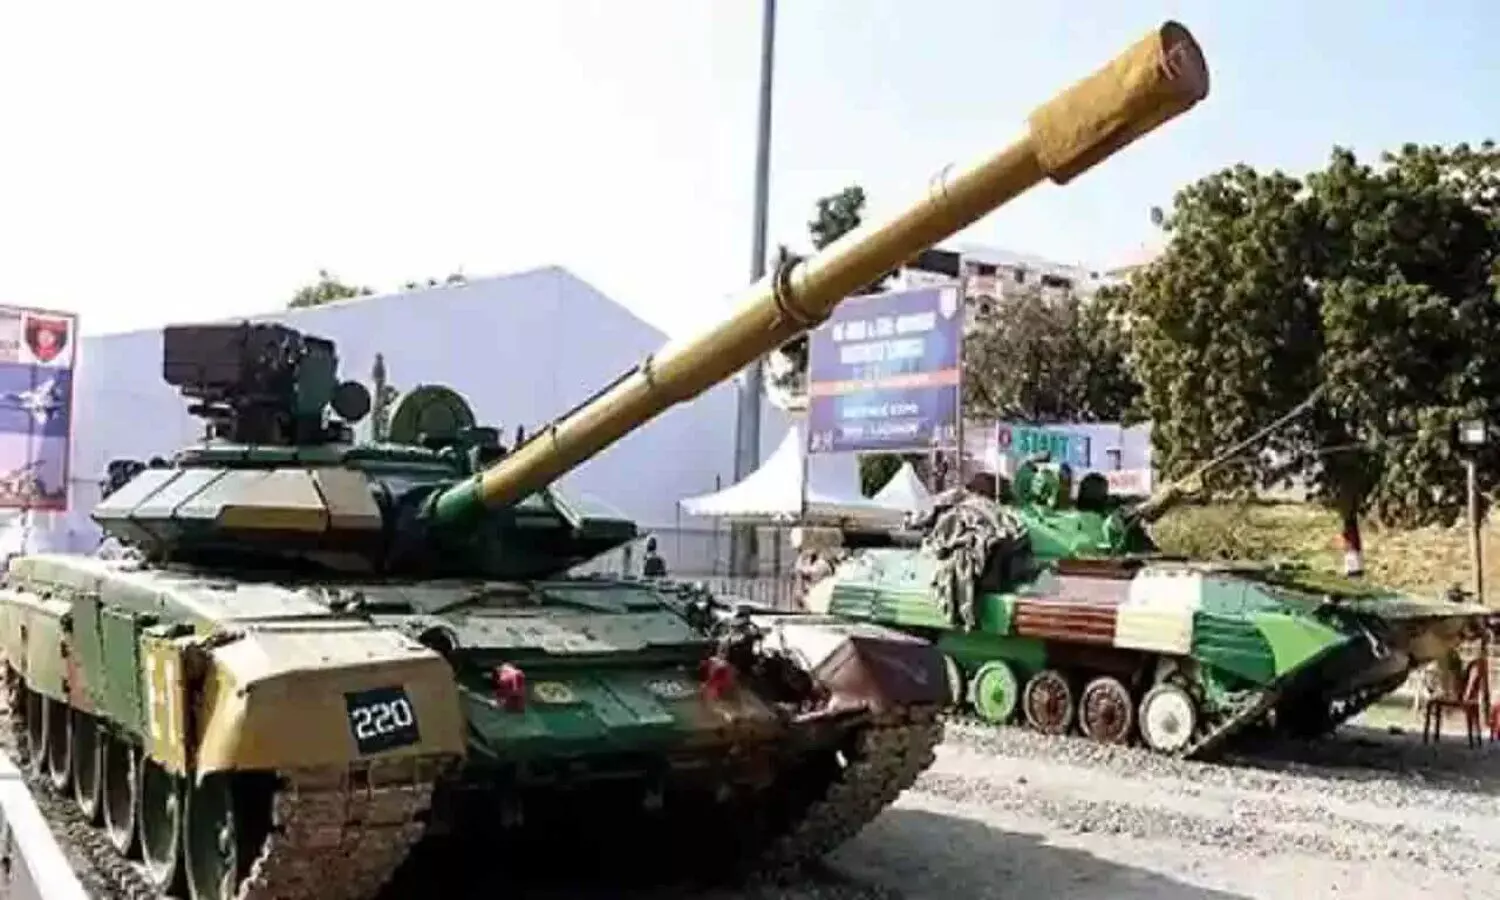 Indian arms imports reduced